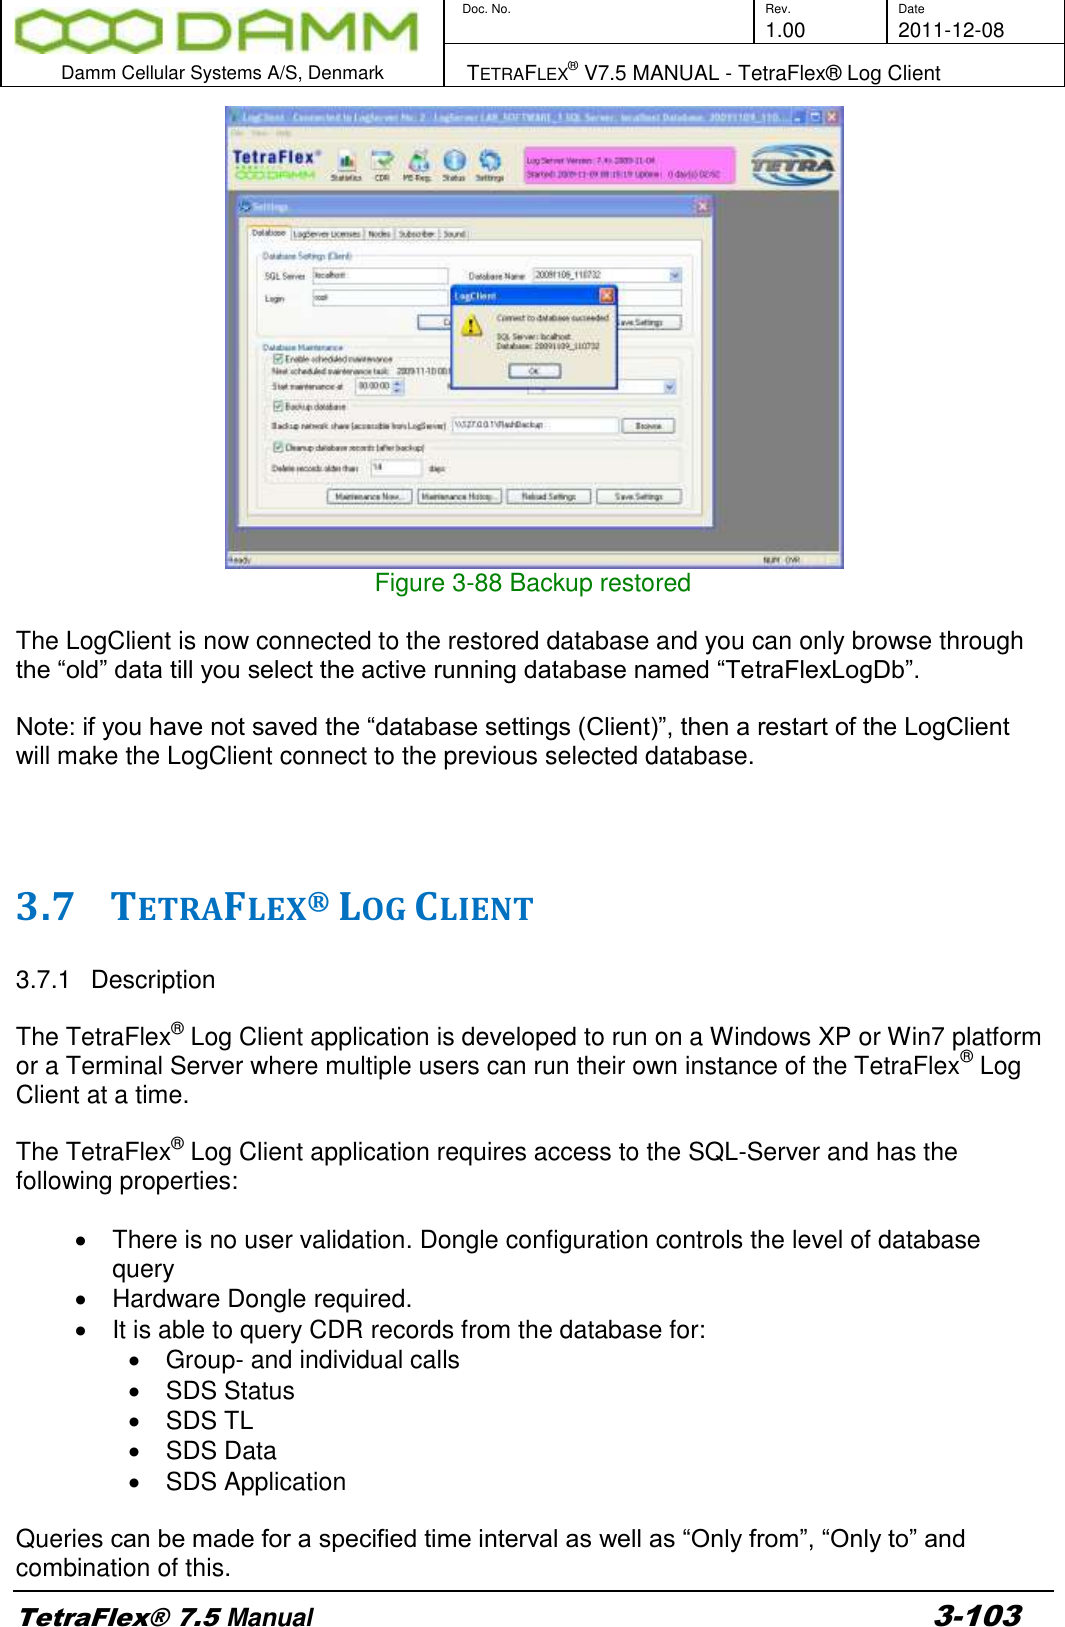        Doc. No. Rev. Date     1.00 2011-12-08  Damm Cellular Systems A/S, Denmark   TETRAFLEX® V7.5 MANUAL - TetraFlex® Log Client  TetraFlex® 7.5 Manual 3-103  Figure 3-88 Backup restored  The LogClient is now connected to the restored database and you can only browse through the “old” data till you select the active running database named “TetraFlexLogDb”.   Note: if you have not saved the “database settings (Client)”, then a restart of the LogClient will make the LogClient connect to the previous selected database.    3.7 TETRAFLEX® LOG CLIENT   3.7.1  Description  The TetraFlex® Log Client application is developed to run on a Windows XP or Win7 platform or a Terminal Server where multiple users can run their own instance of the TetraFlex® Log Client at a time.  The TetraFlex® Log Client application requires access to the SQL-Server and has the following properties:    There is no user validation. Dongle configuration controls the level of database query   Hardware Dongle required.   It is able to query CDR records from the database for:    Group- and individual calls   SDS Status   SDS TL   SDS Data   SDS Application  Queries can be made for a specified time interval as well as “Only from”, “Only to” and combination of this.  